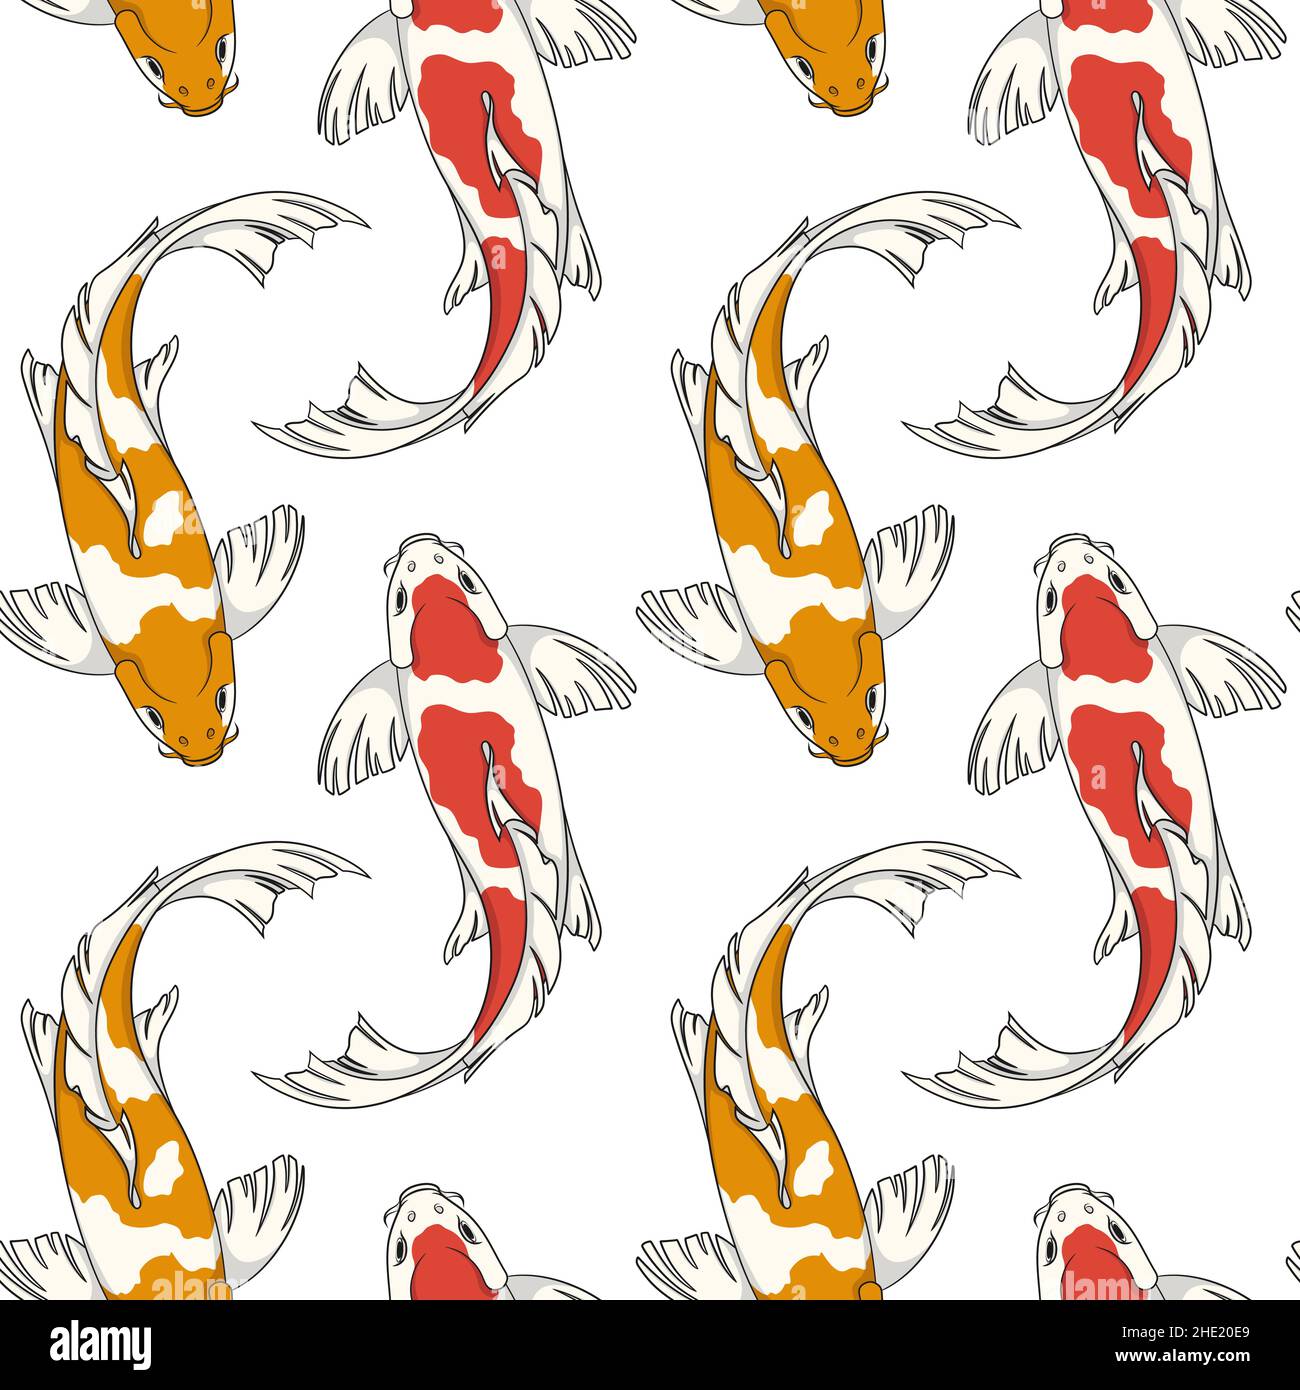 Koi fish pattern Stock Vector Images - Alamy